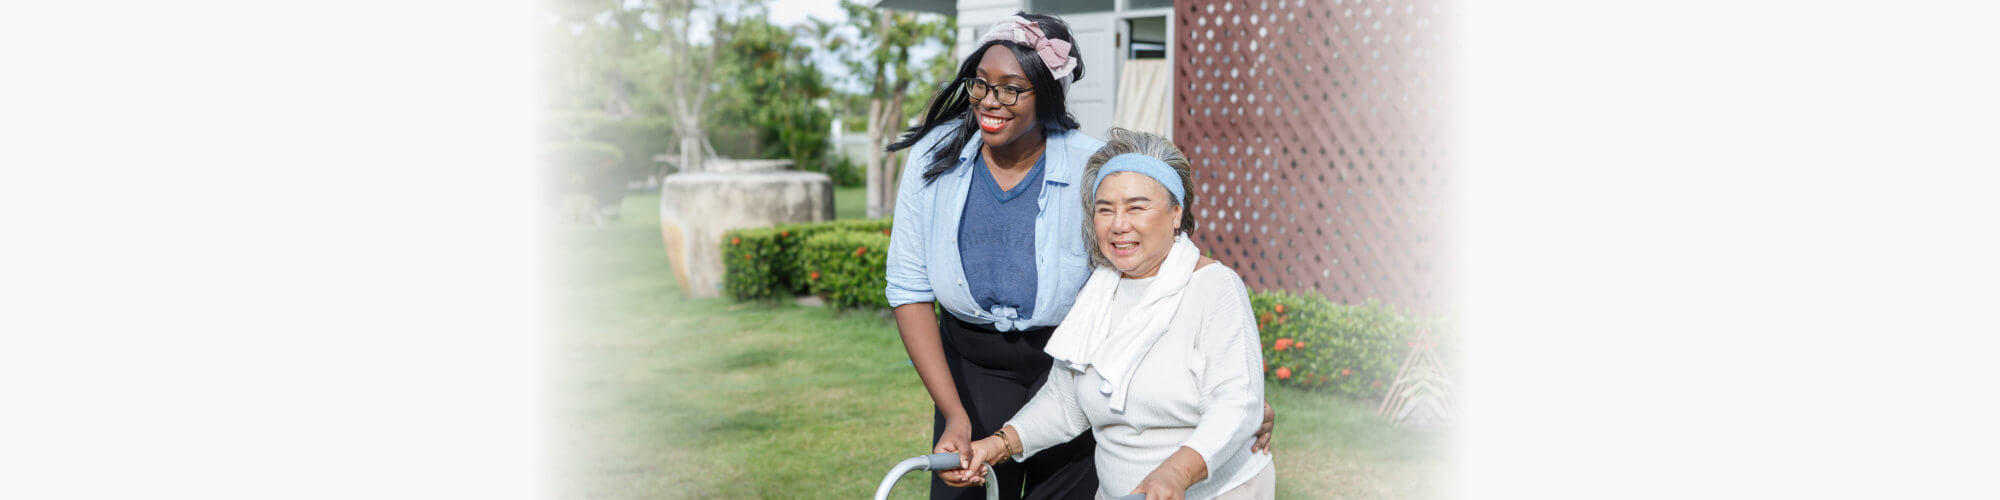 Home health care worker and an elderly